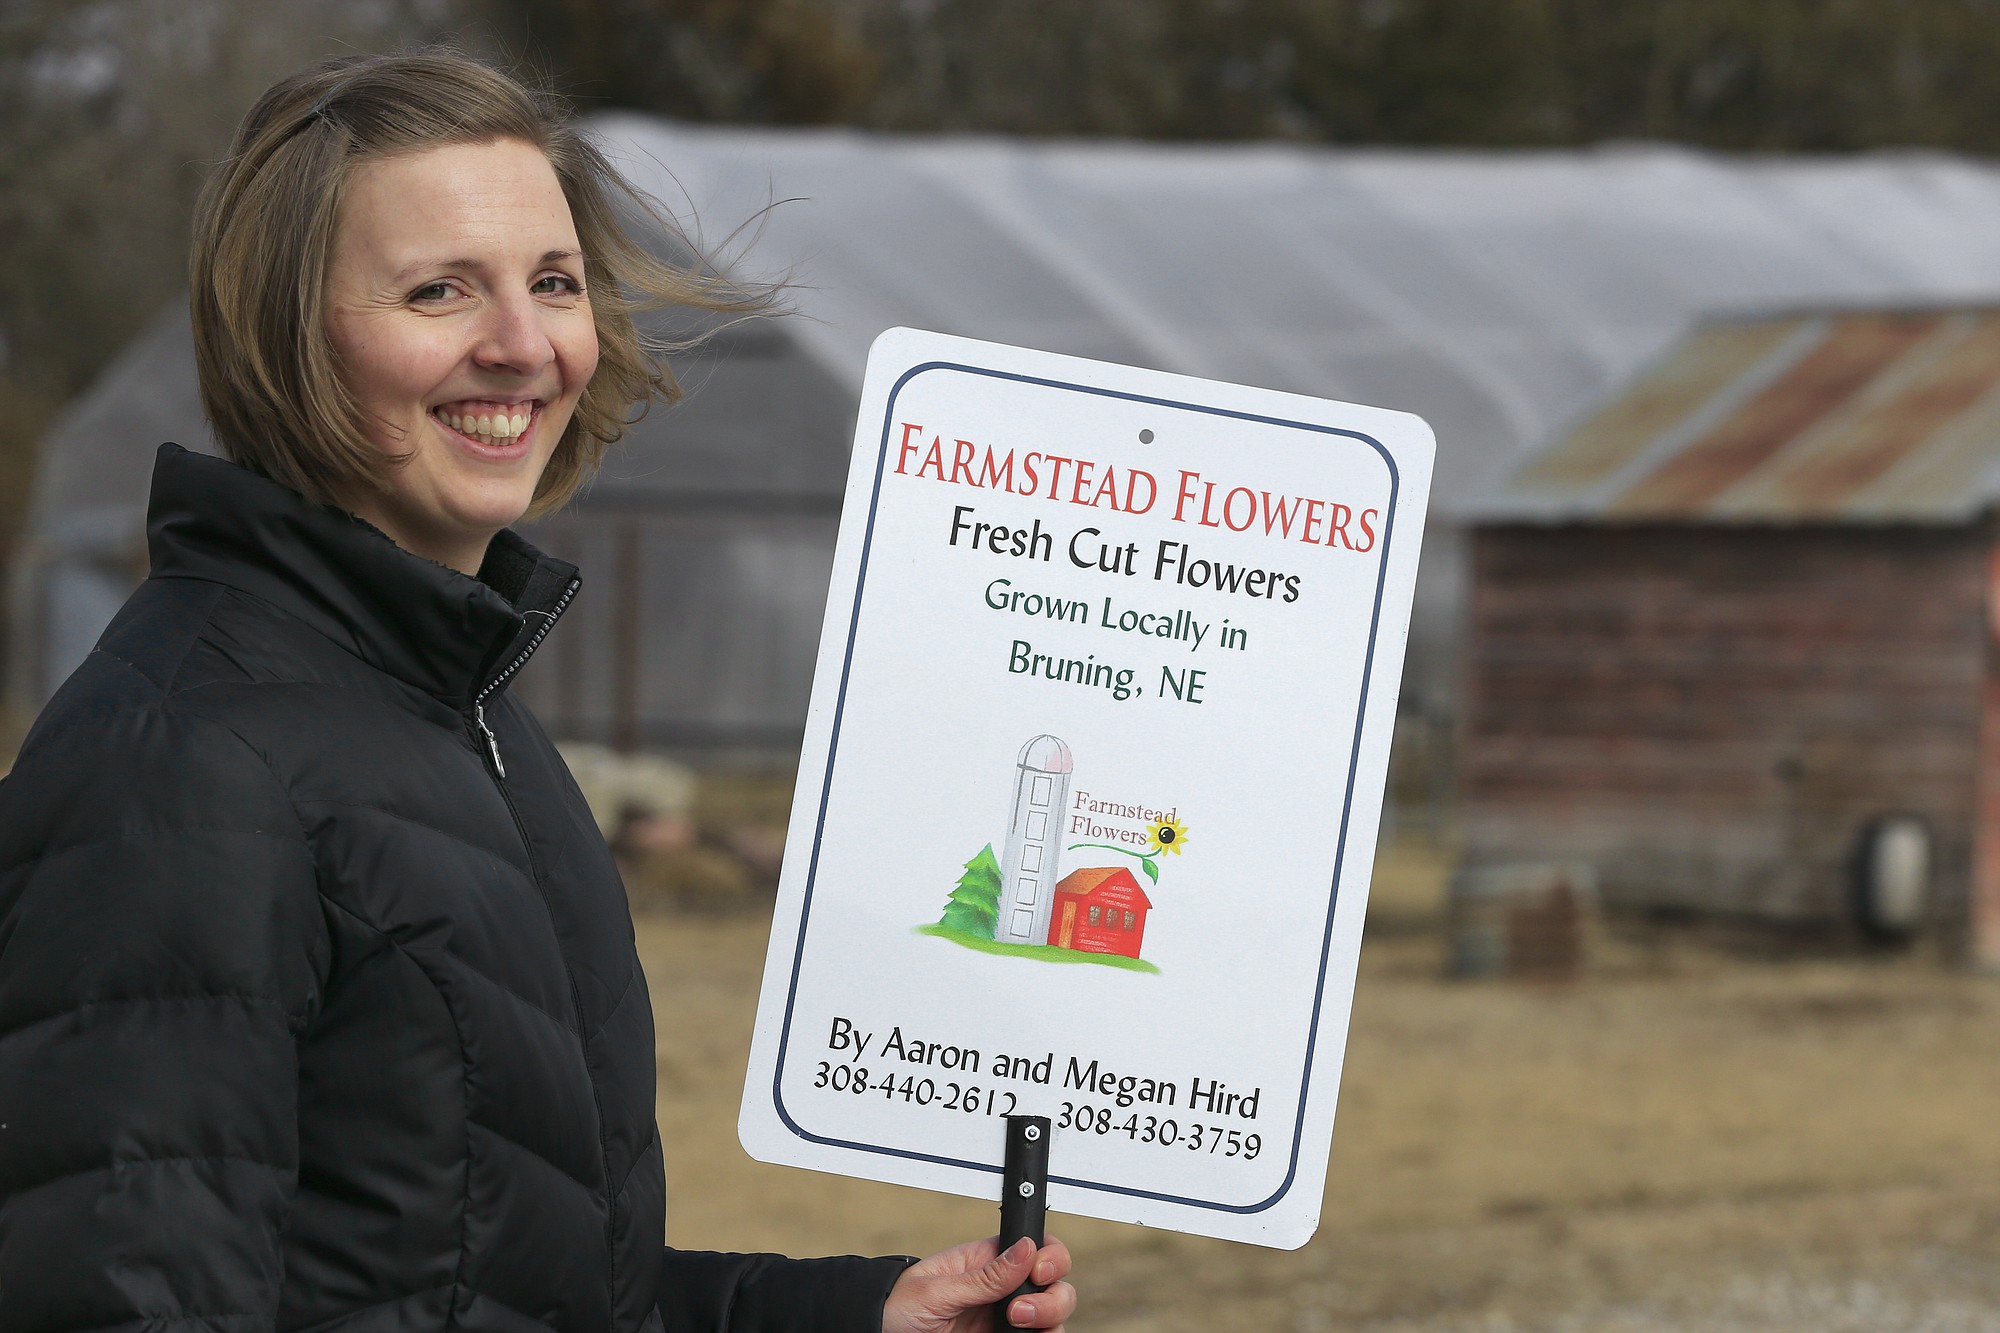 Megan Hird, owner of Farmstead Flowers, poses with a sign in front of her greenhouse in Bruning, Neb.